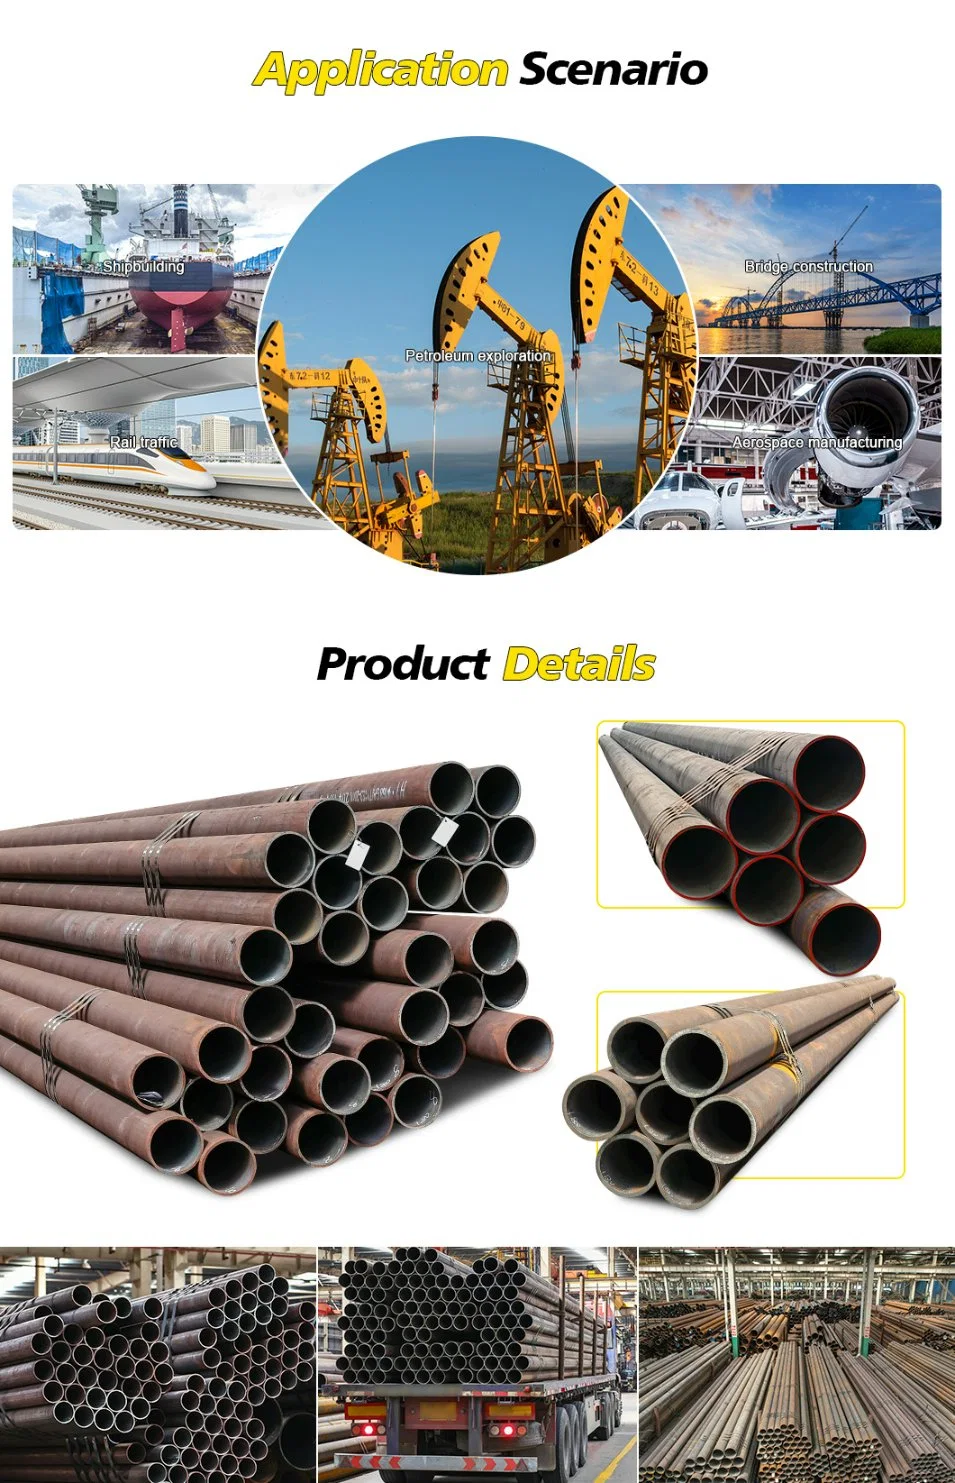 ASTM Q235B A36 Schedule 40 Black Round Squar Tubes Pipes Seamless Pipe Welded Carbon Steel Tube Stainless Steel Pipes Galvanized Steel A53 A192 Oil Gas Pipes